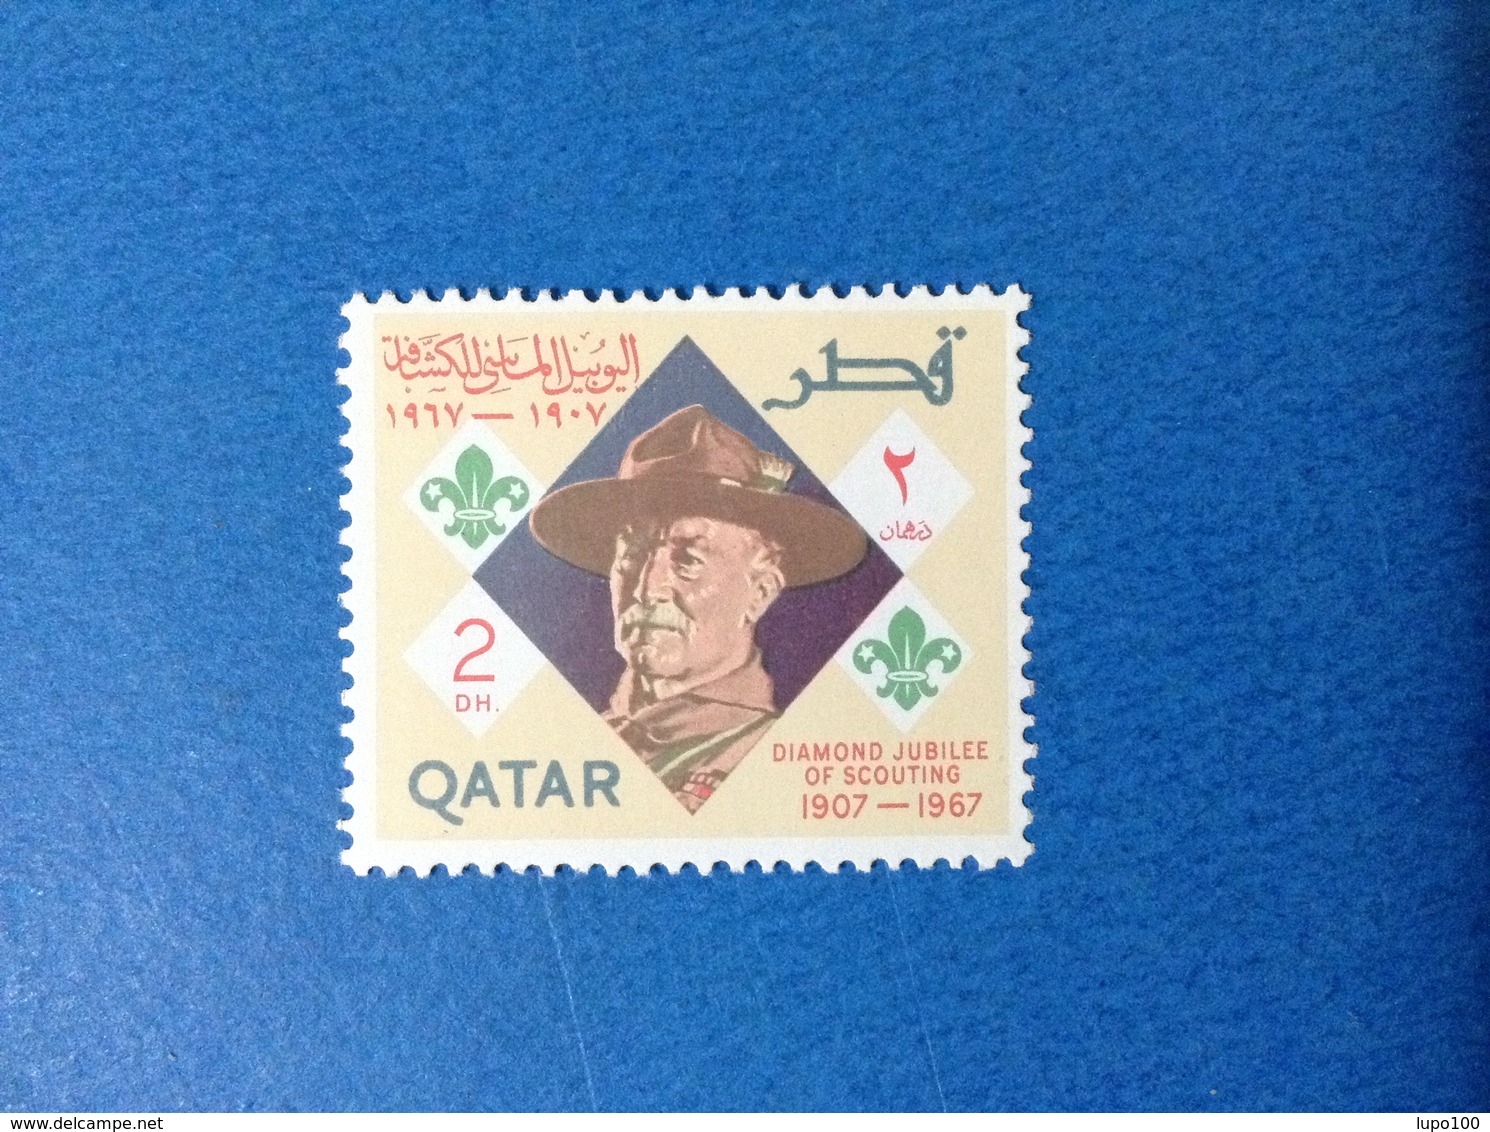 1967 QATAR SCOUT 2 Dh DIAMOND JUBILEE OF SCOUTING FRANCOBOLLO NUOVO STAMP NEW MNH** - Qatar